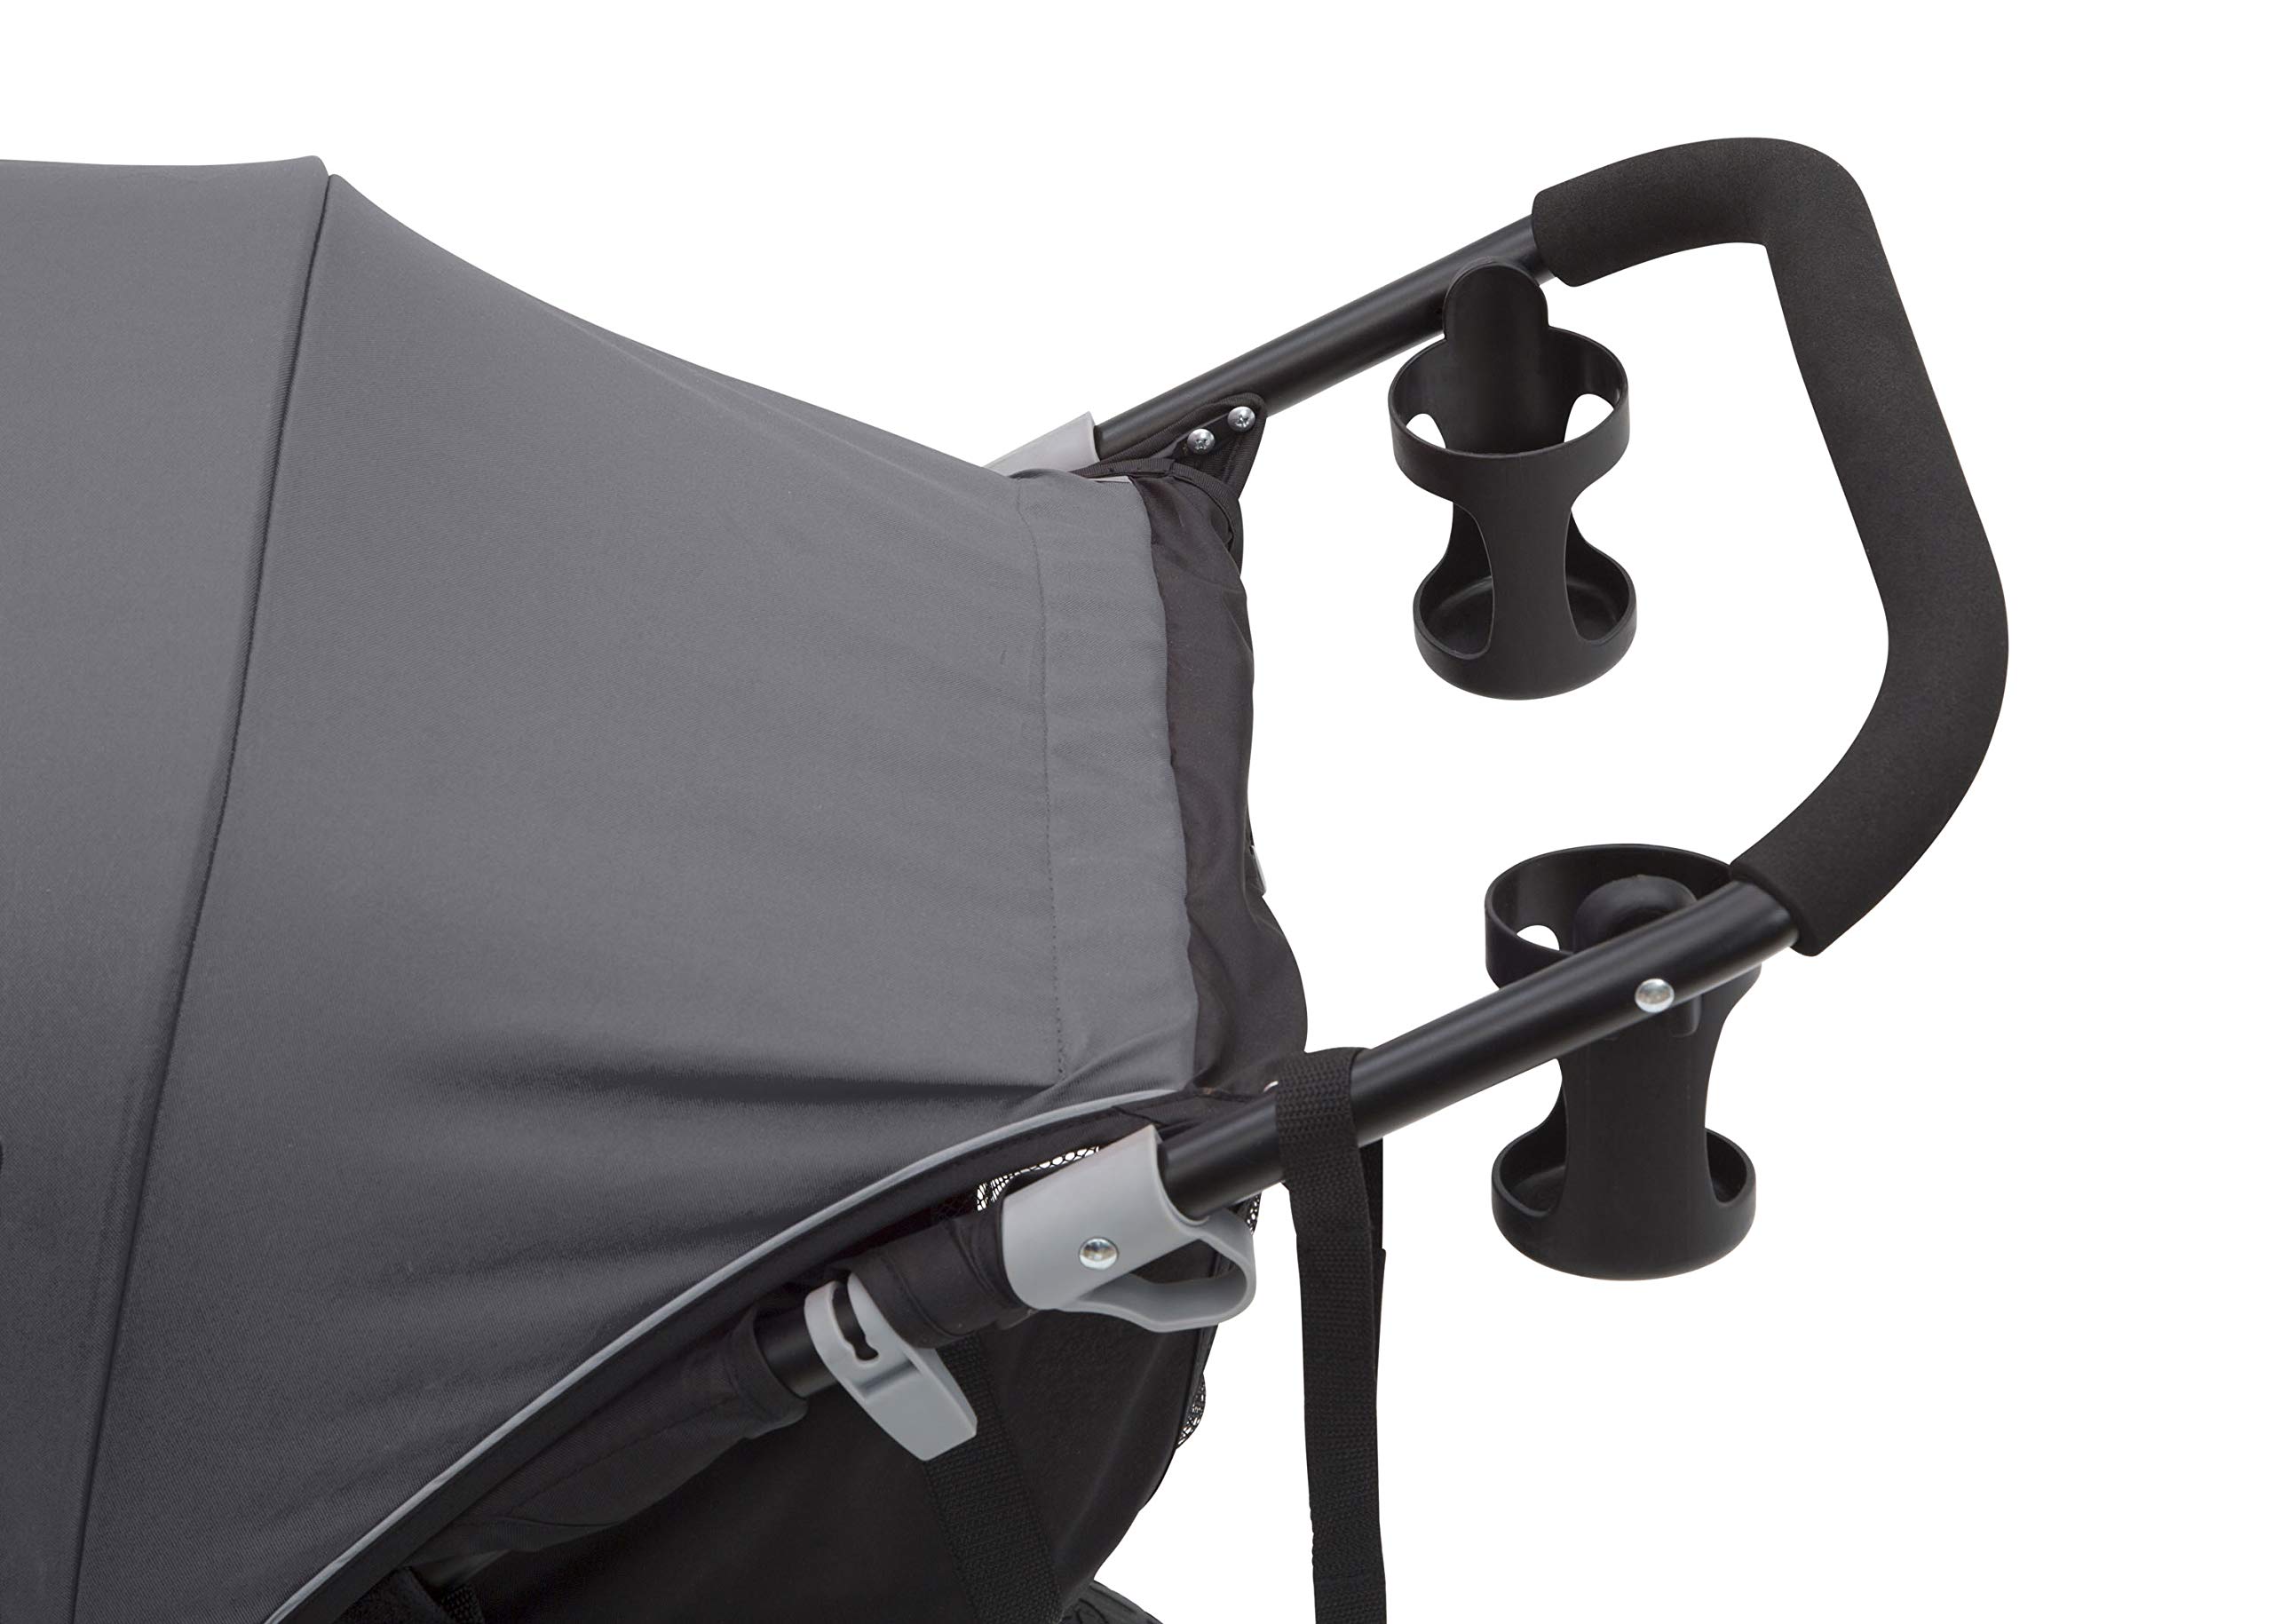 Jeep Classic Jogging Stroller by Delta Chidlren, Grey